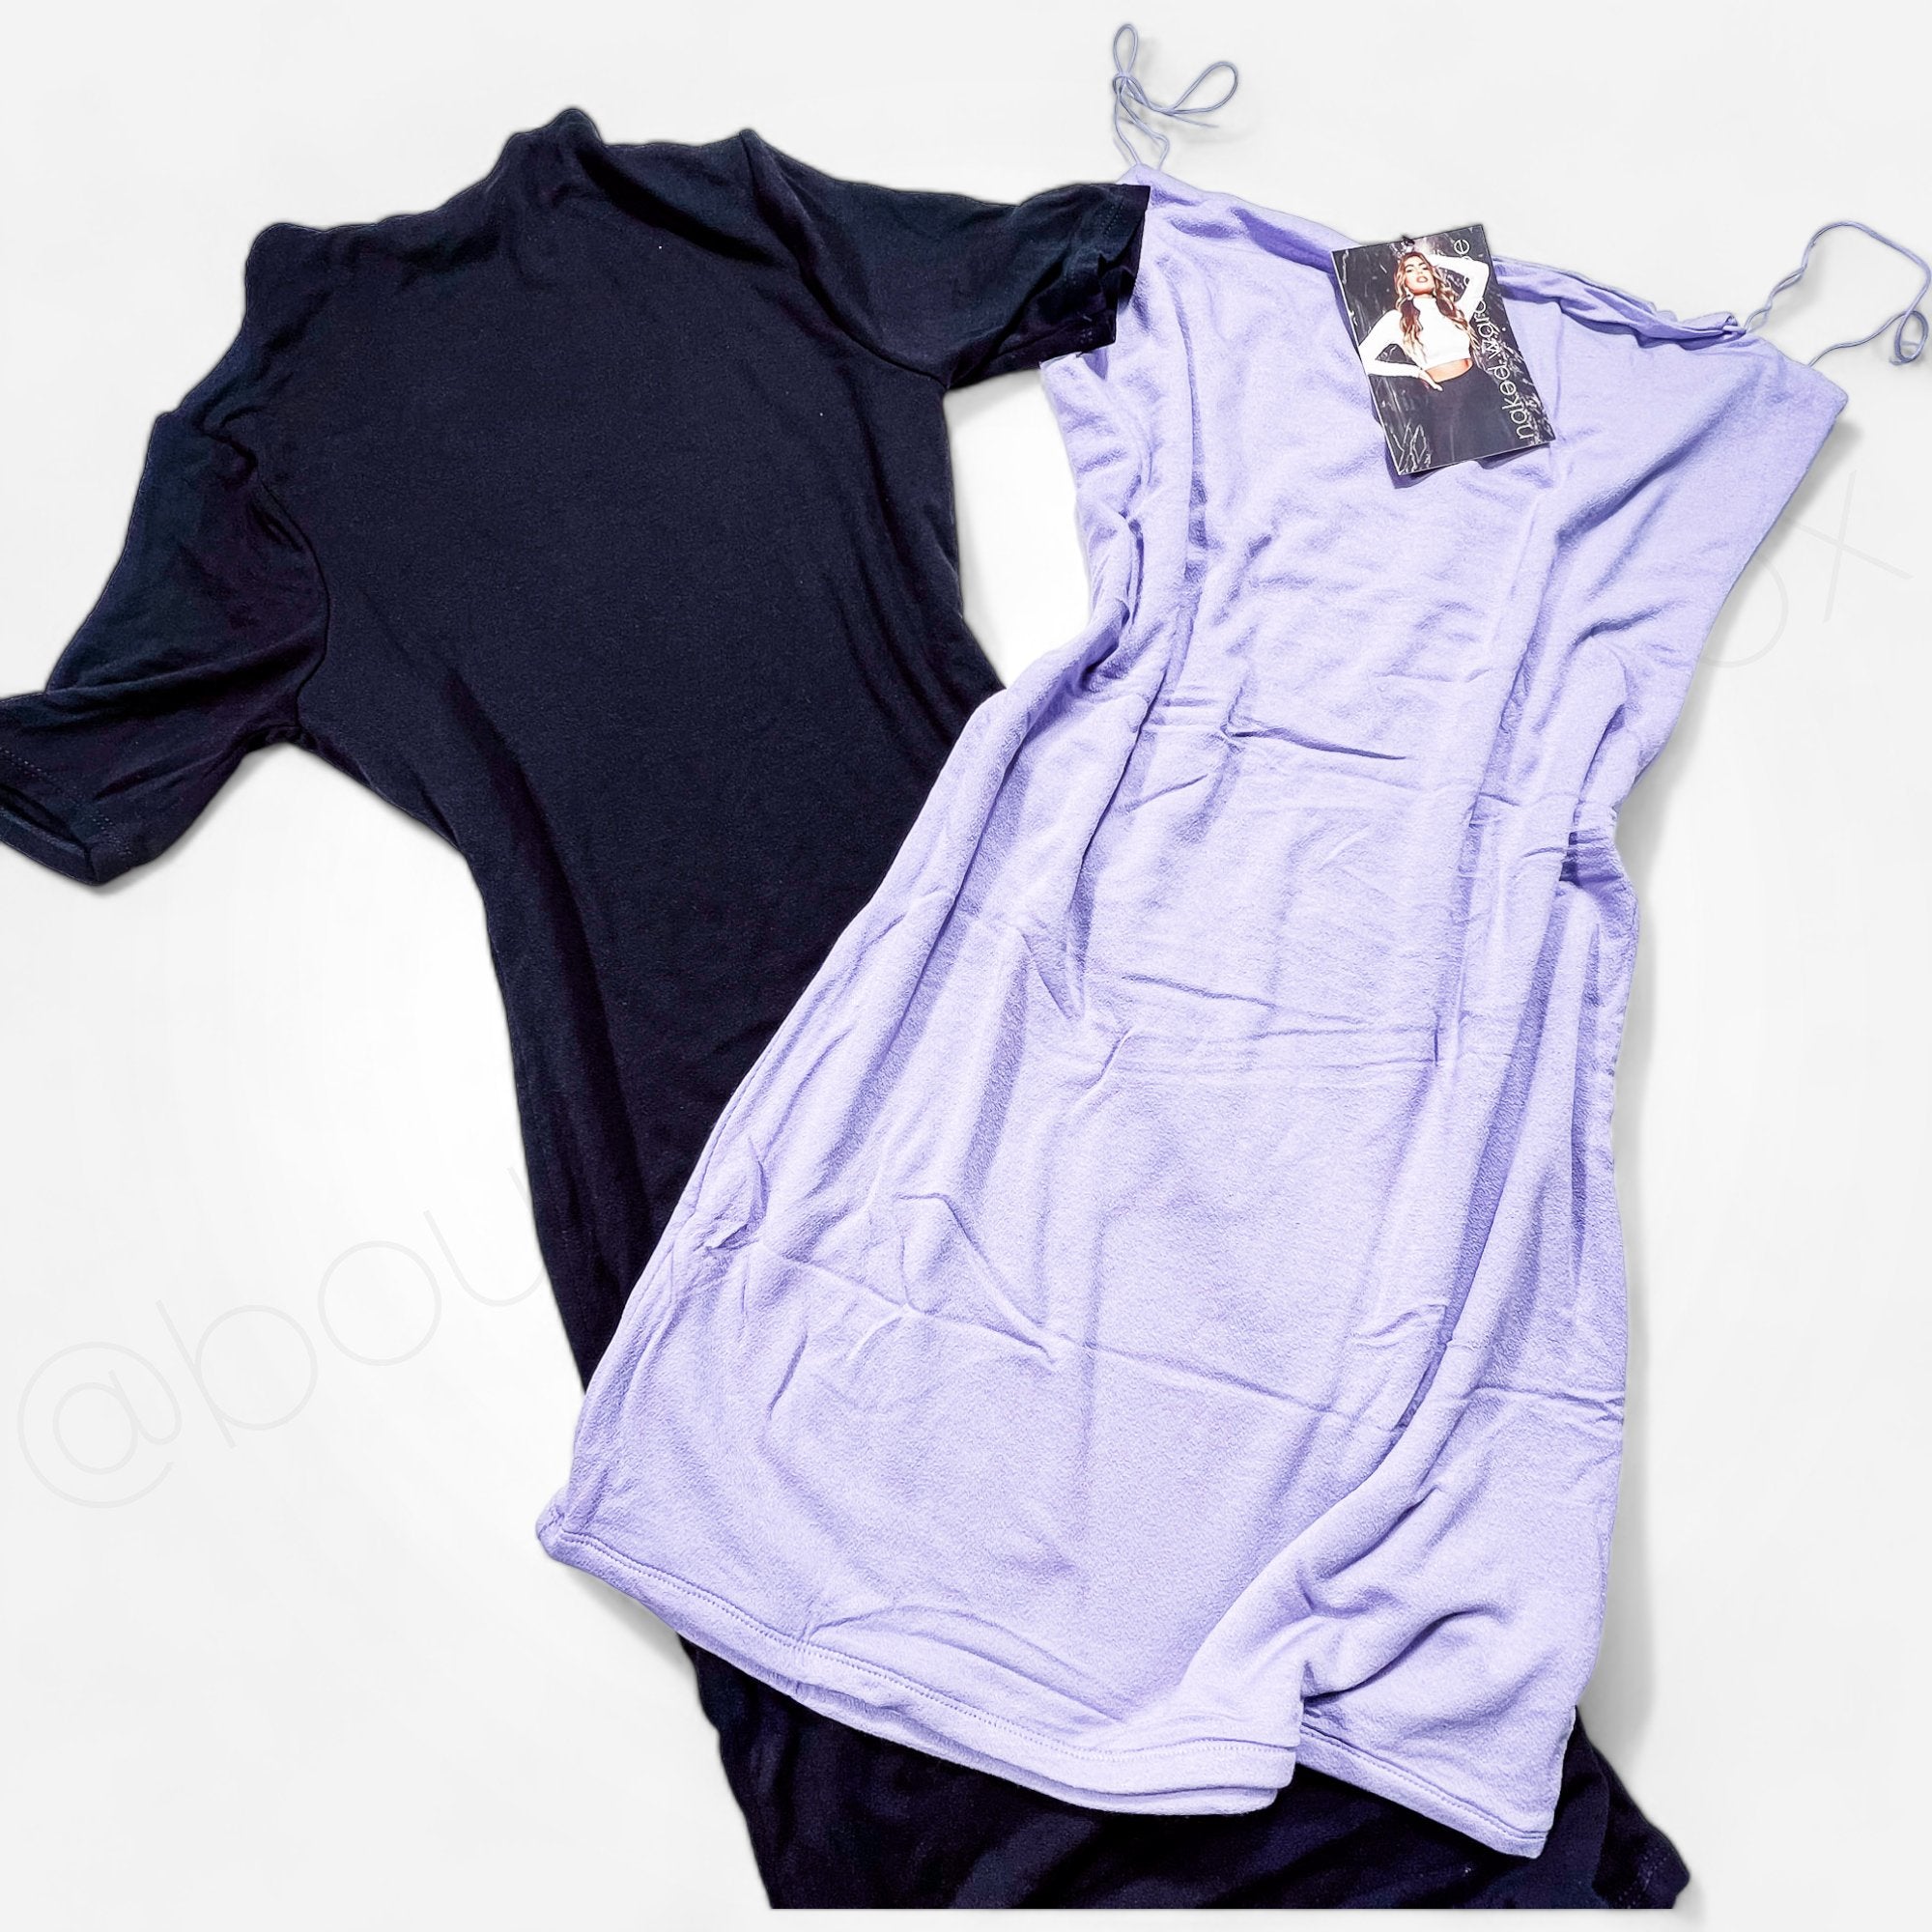 Naked Wardrobe Assorted Women's New Wholesale Clothing - Boutique by the Box Wholesale for Resellers